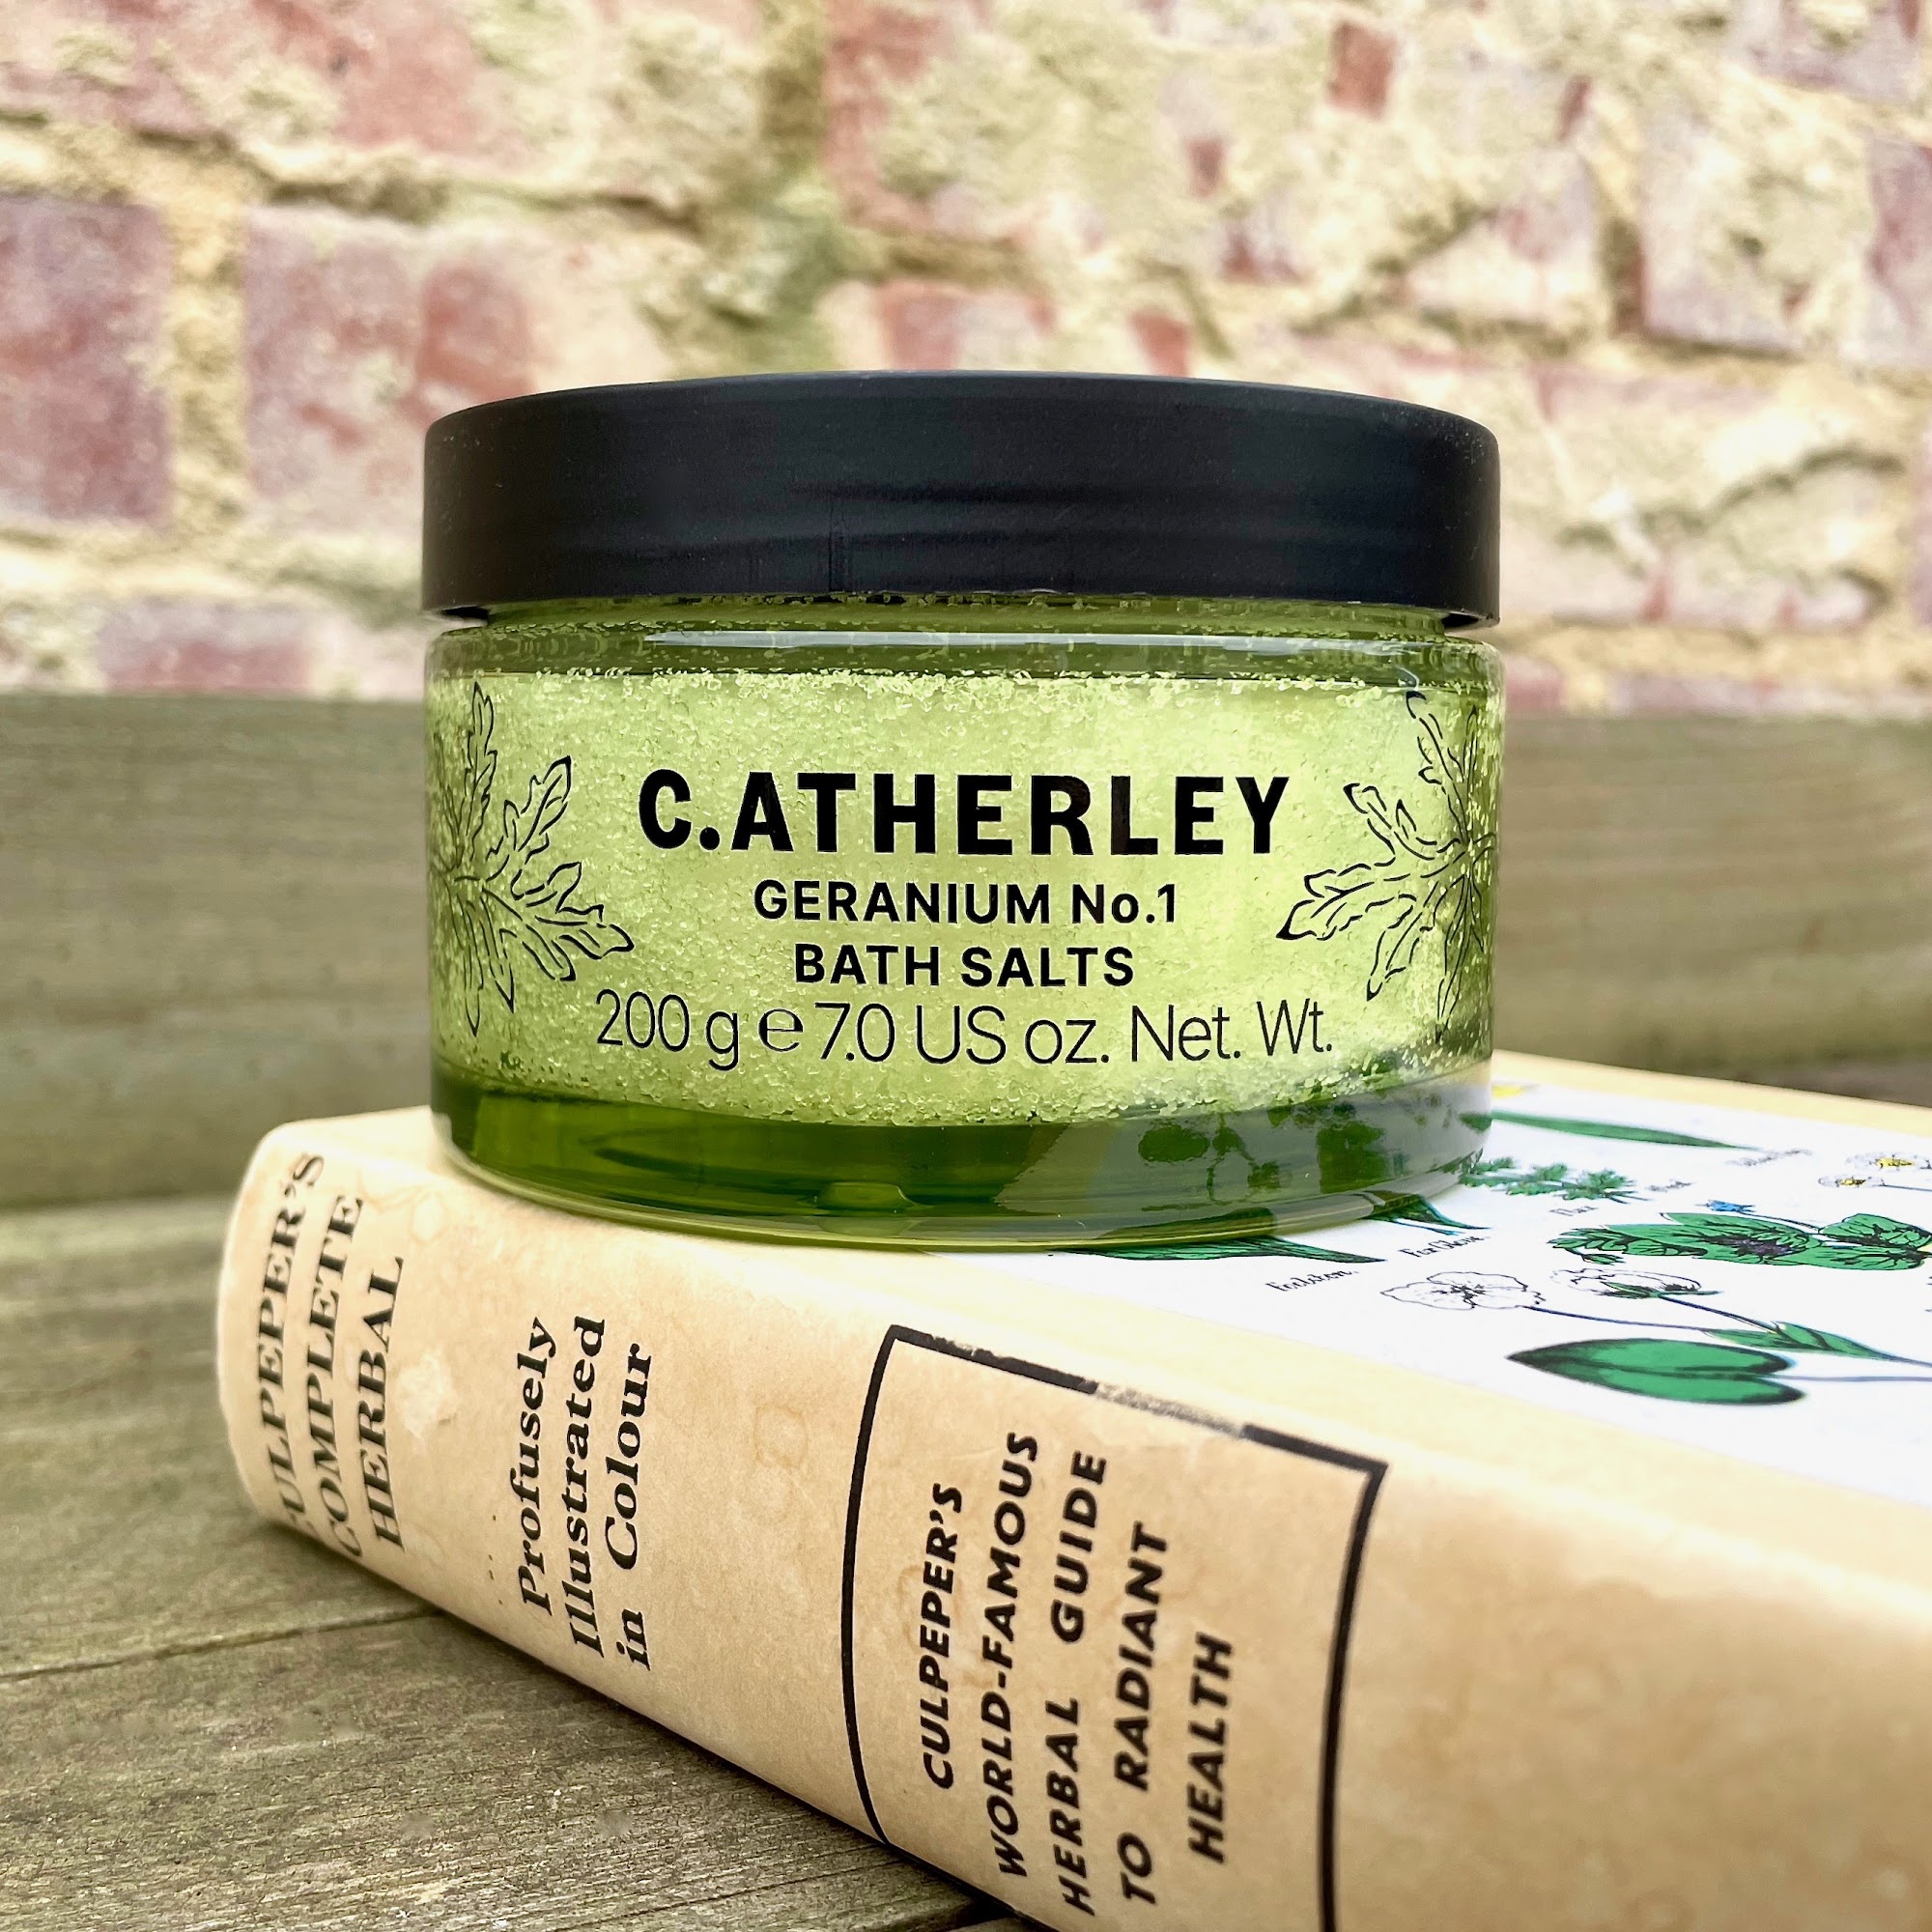 A jar of Geranium No.1 Bath Salts from C.Atherley, the new company from Cath Kidston Padgham and Heathcote & Ivory